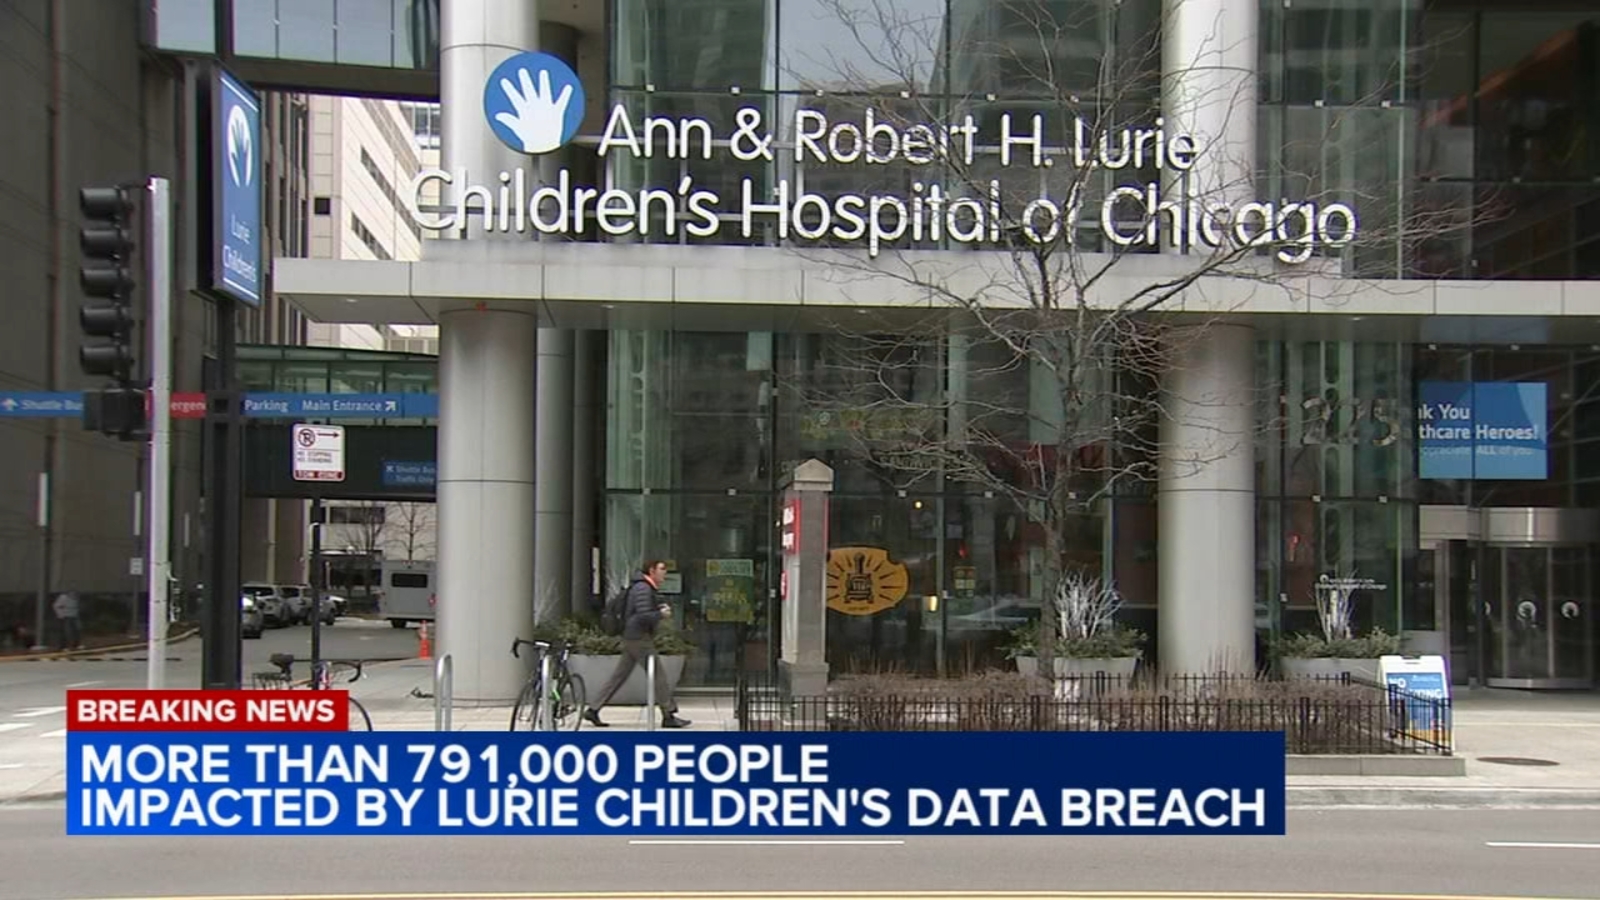 Lurie Children’s Hospital cybersecurity breach affected more than 790K people, including patients, officials say [Video]